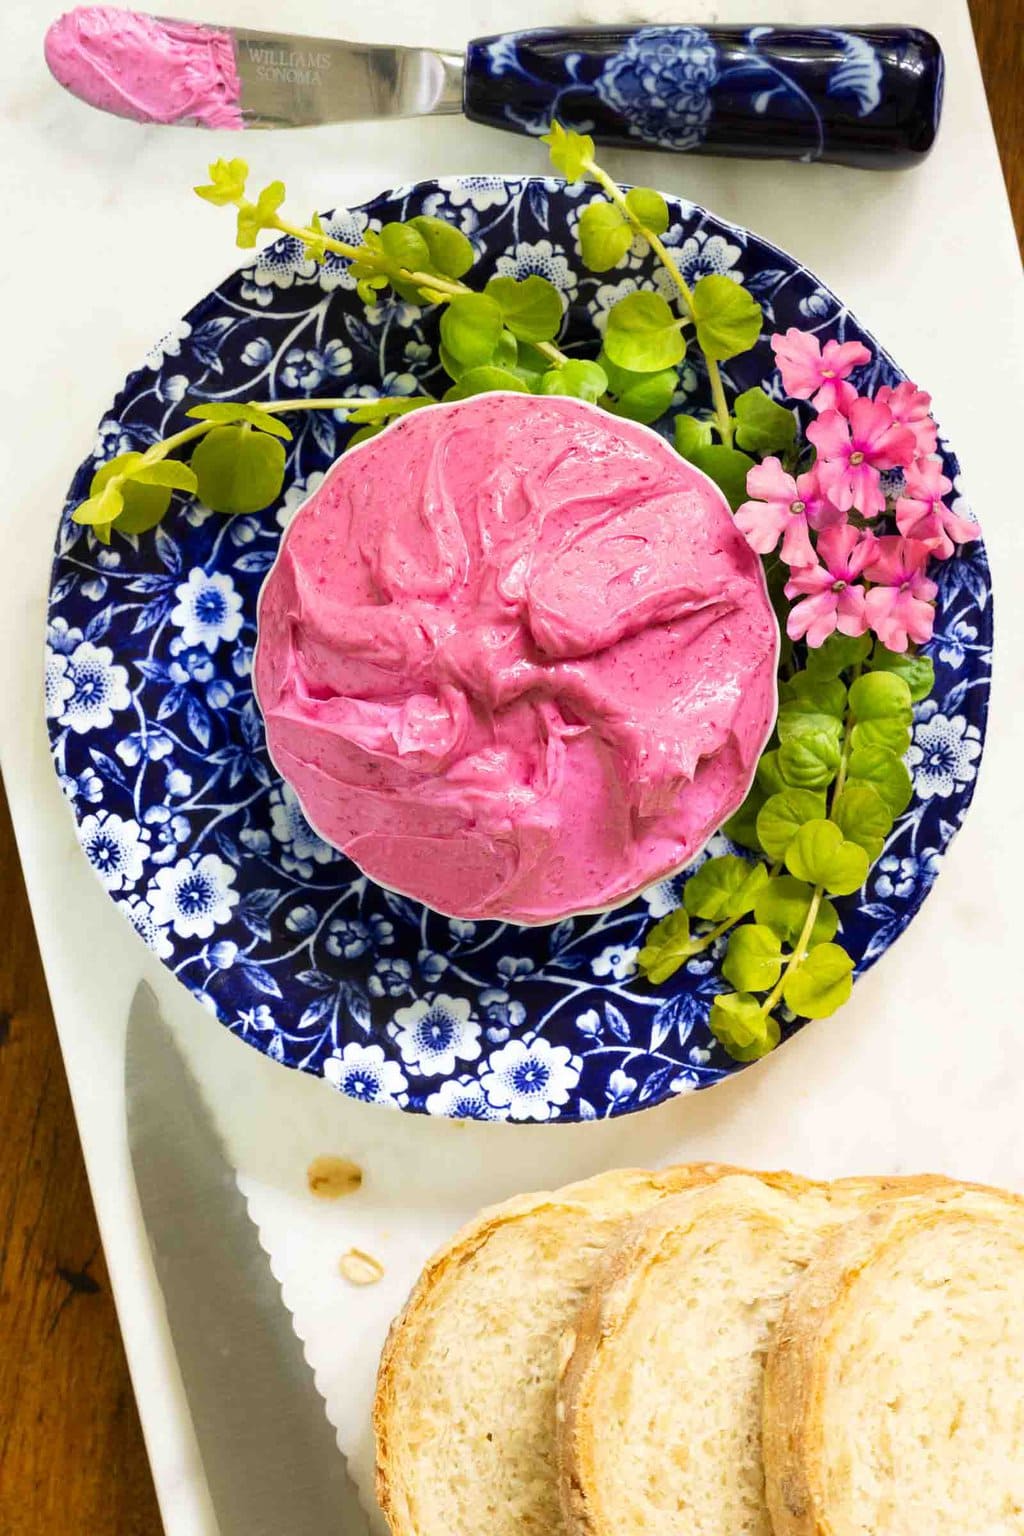 Vertical overhead closeup photo of Beet Butter on a blue and white patterned plate surrounded by greenery.